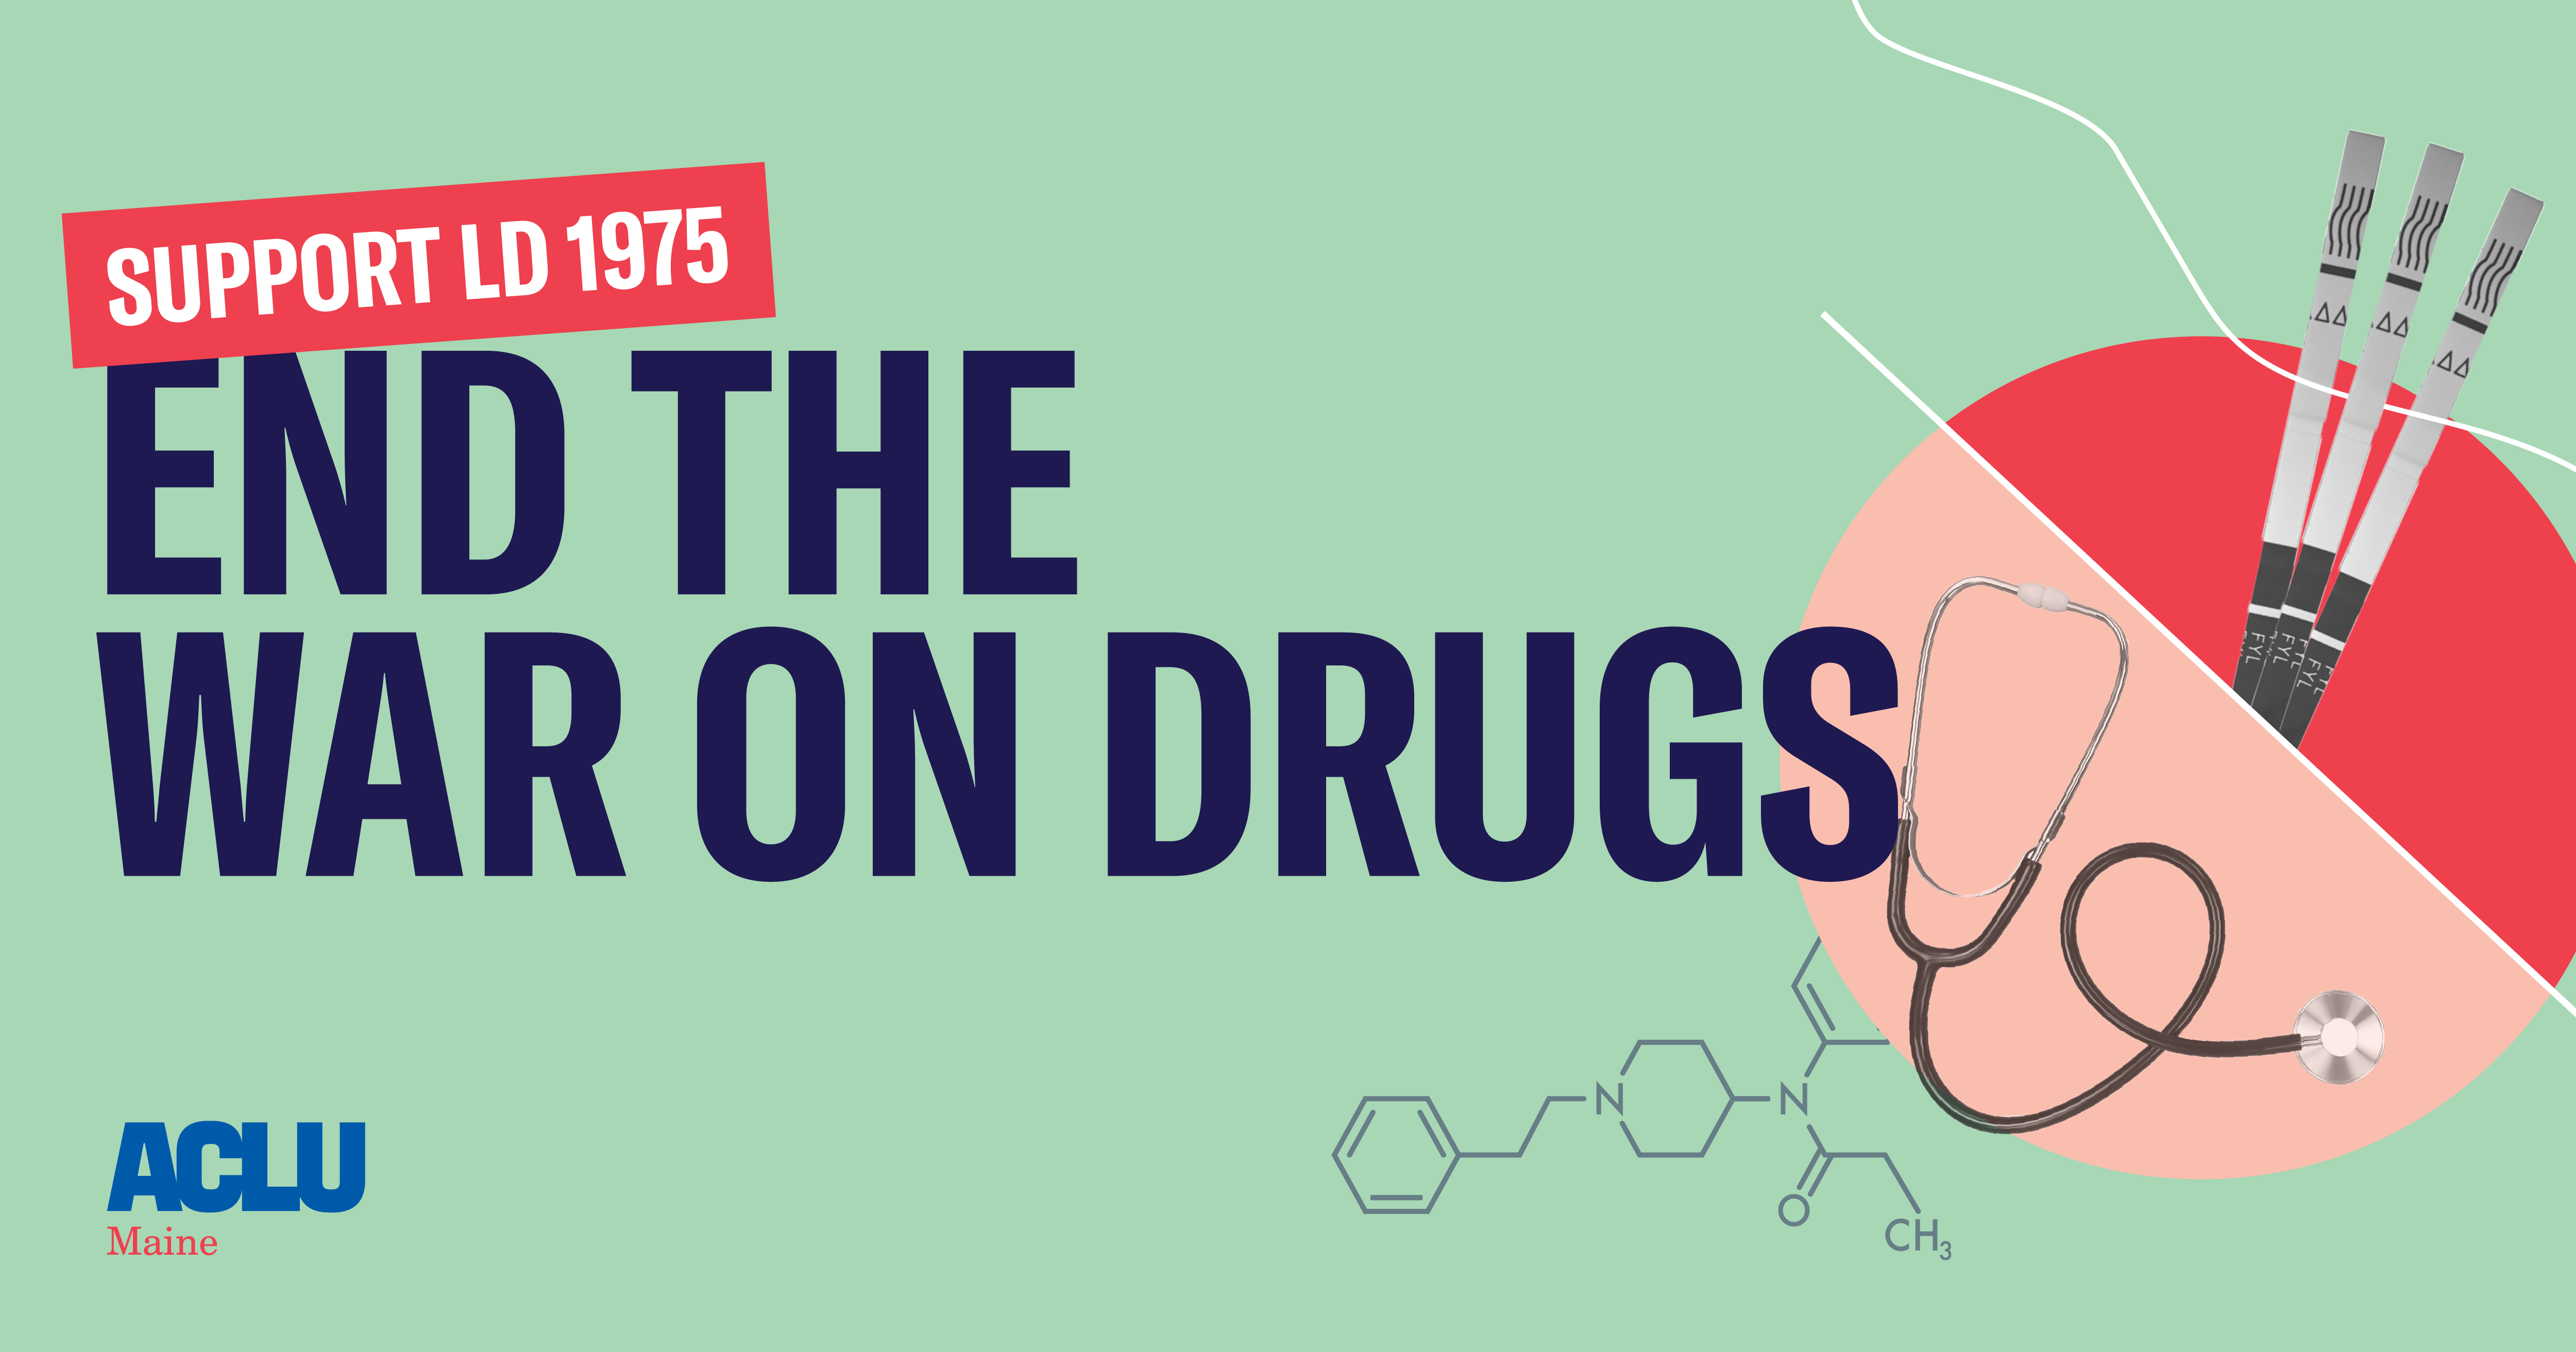 Support LD 1975, End the War on Drugs